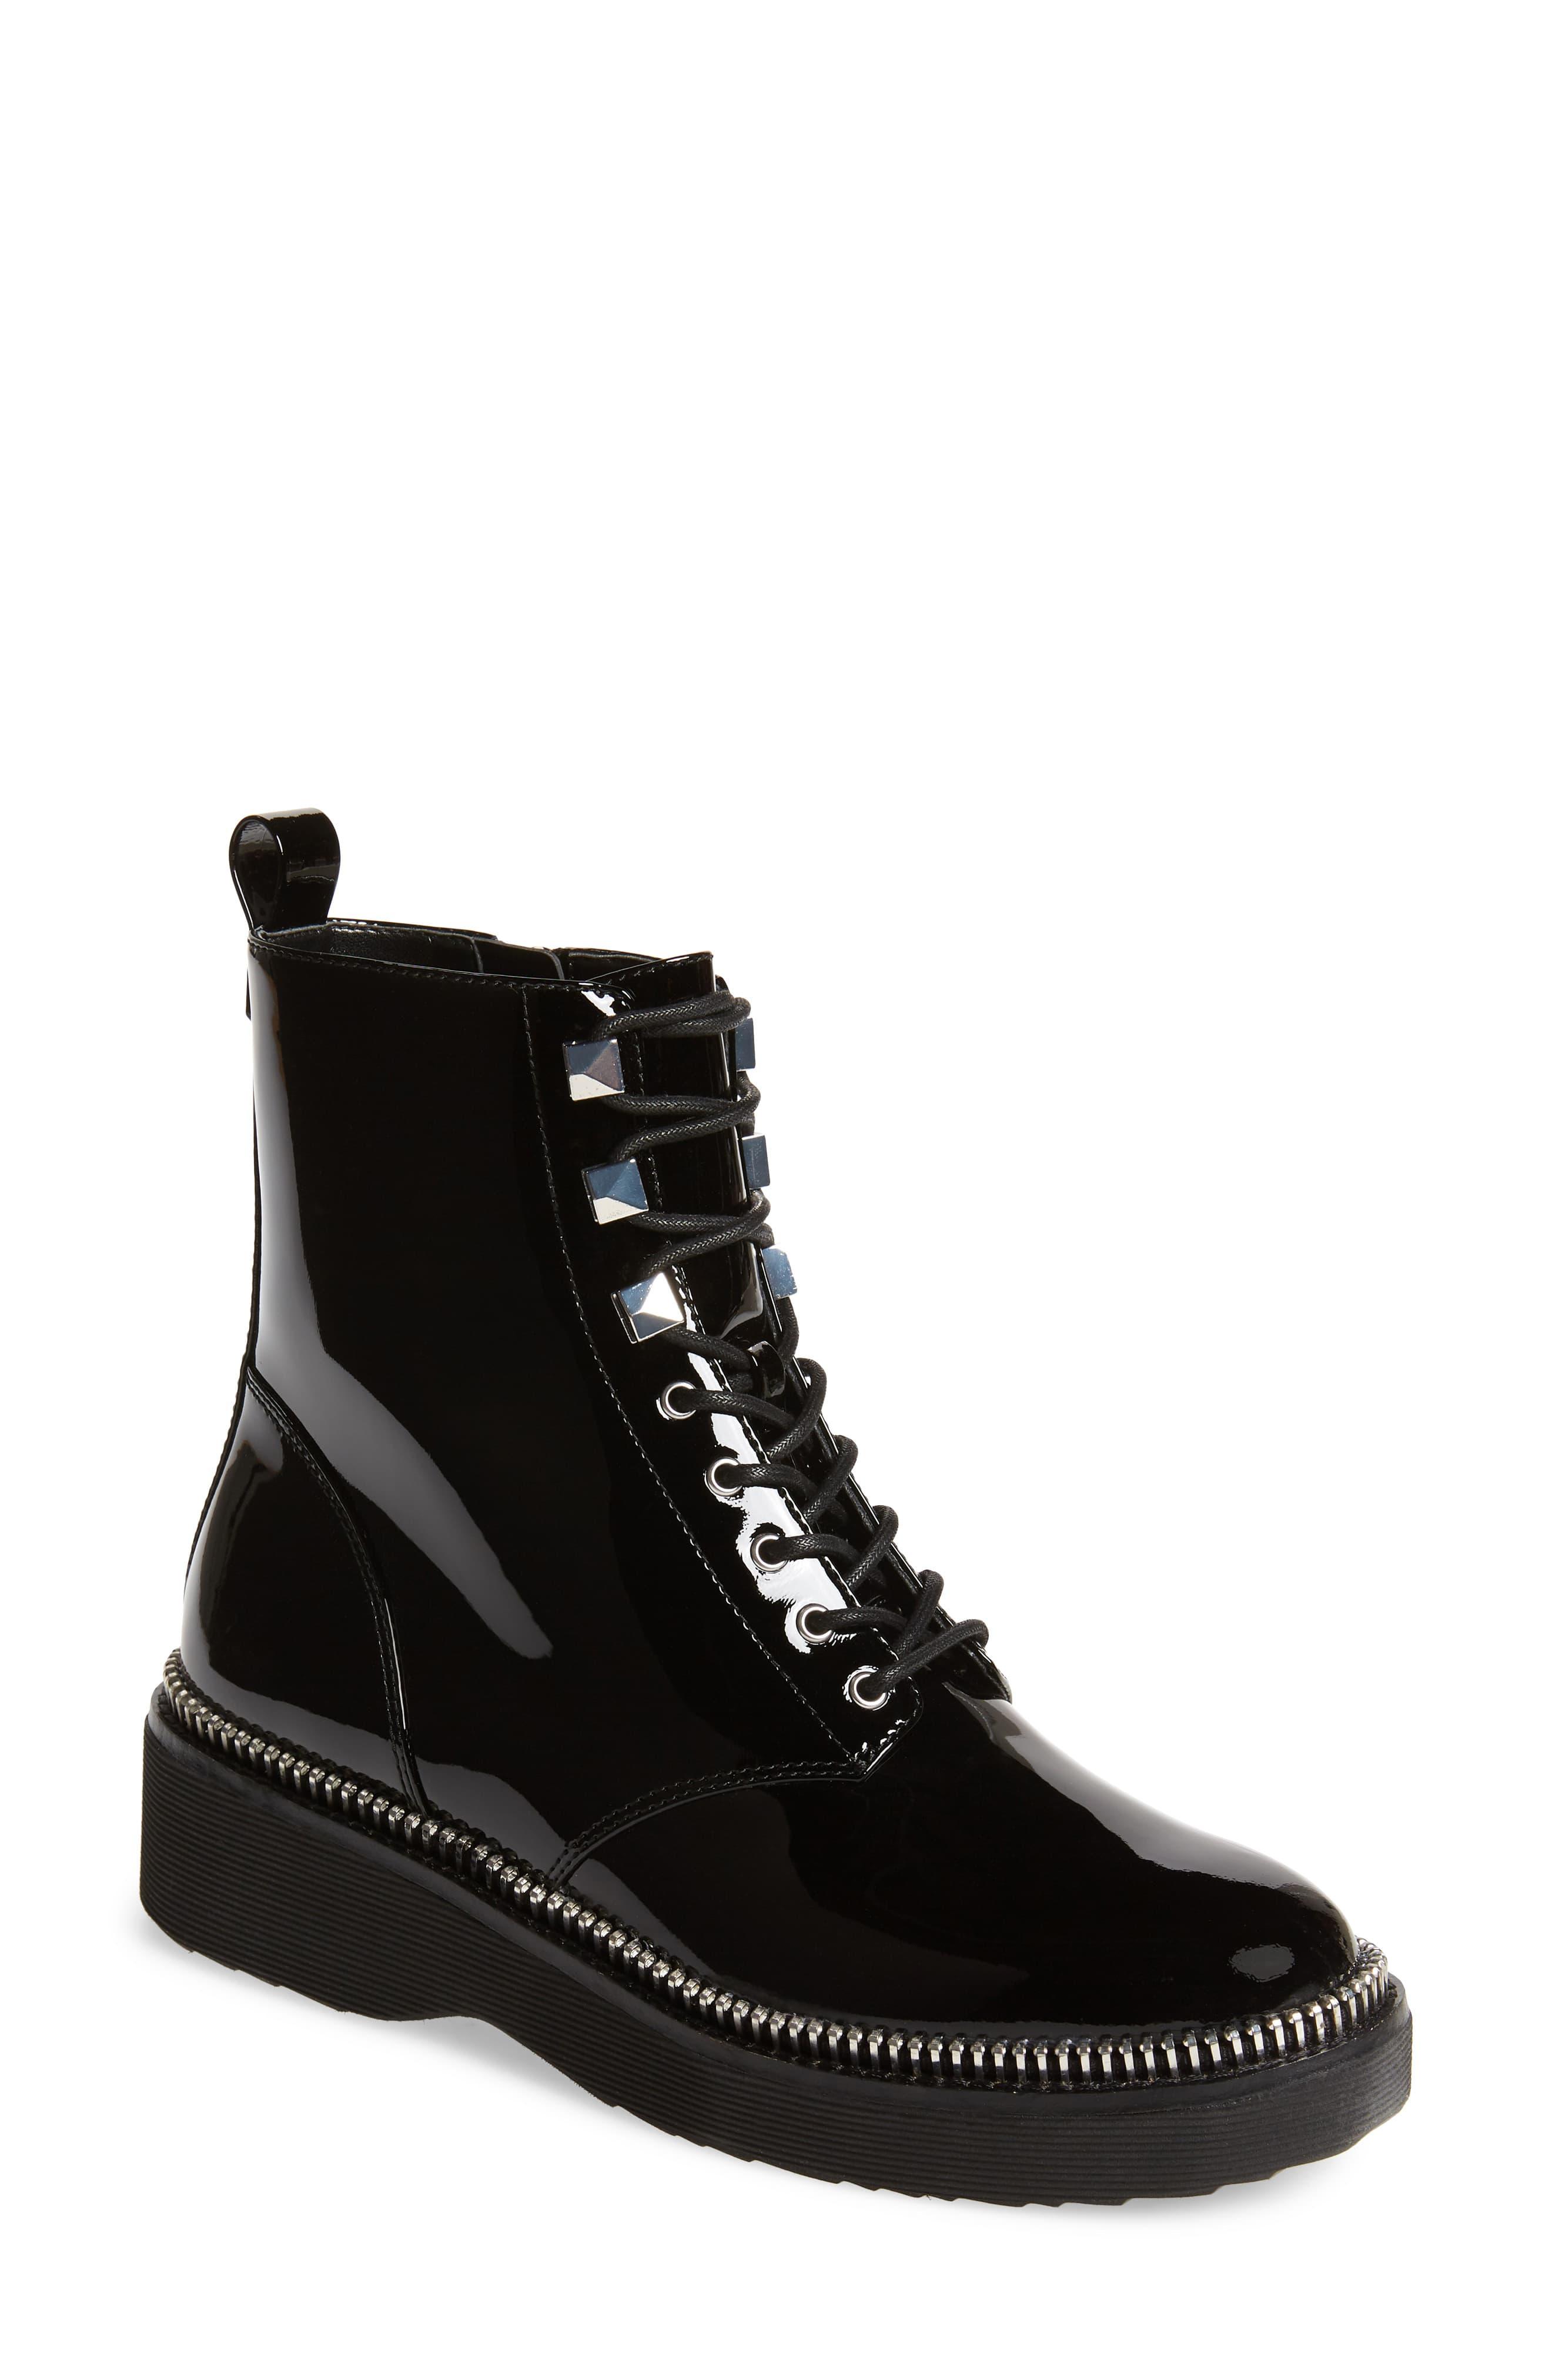 MICHAEL Michael Kors Haskell Combat Boot in Black Patent Leather (Black ...